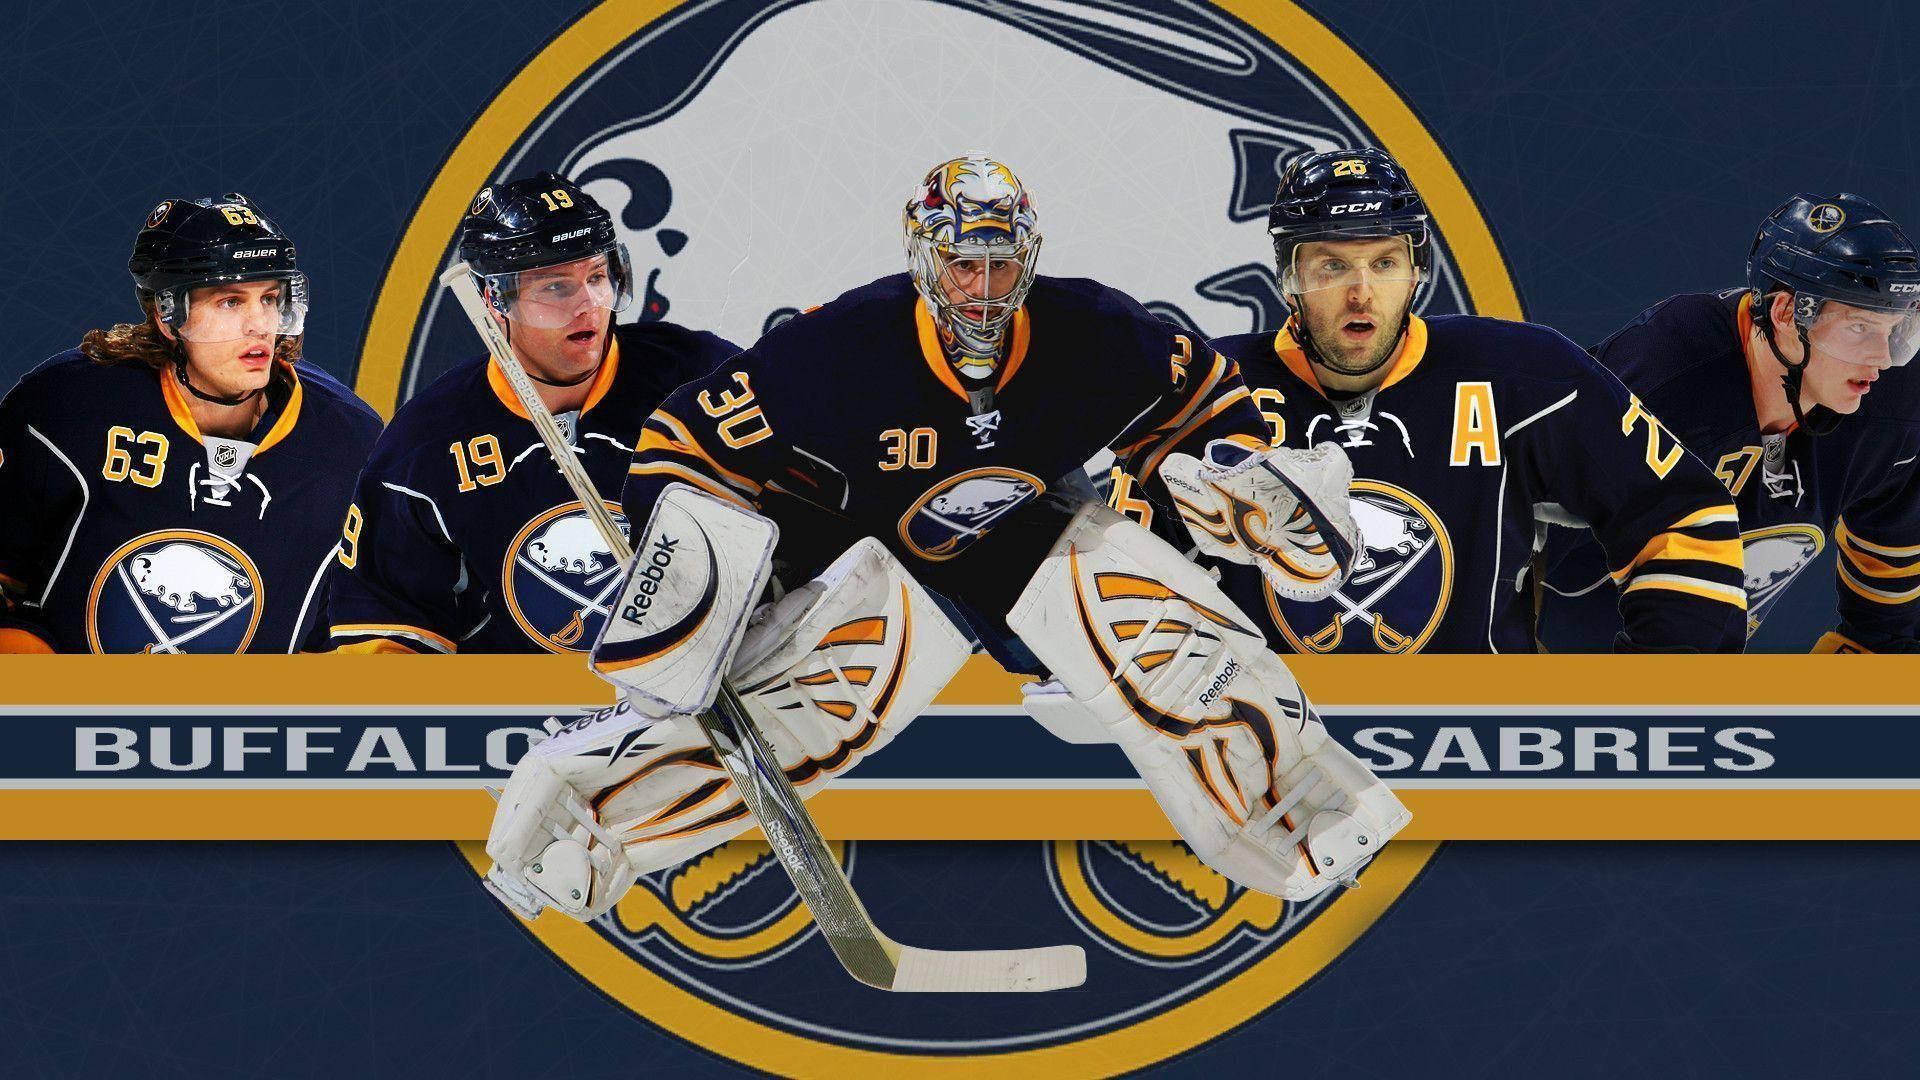 Buffalo Sabres Players in Action Wallpaper